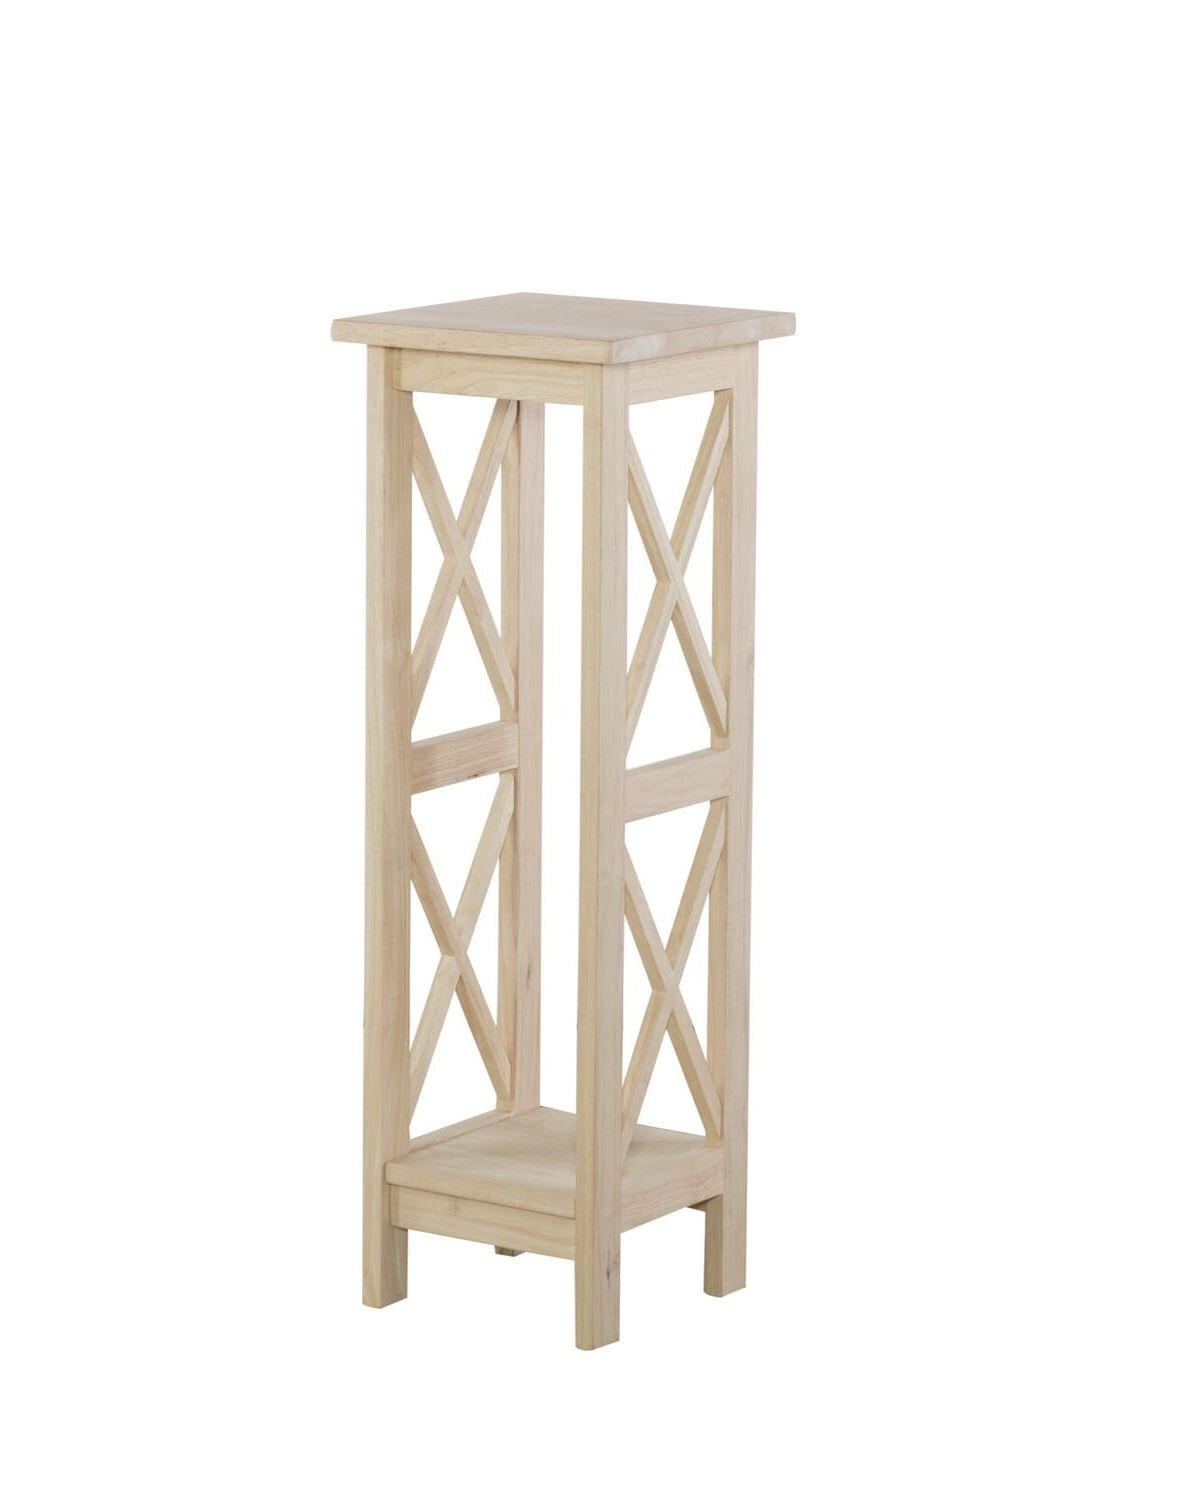 36 Inch Plant Stands Inside Current Ot 3069x 36 Inch Tall X Sided Plant Stand (View 9 of 10)